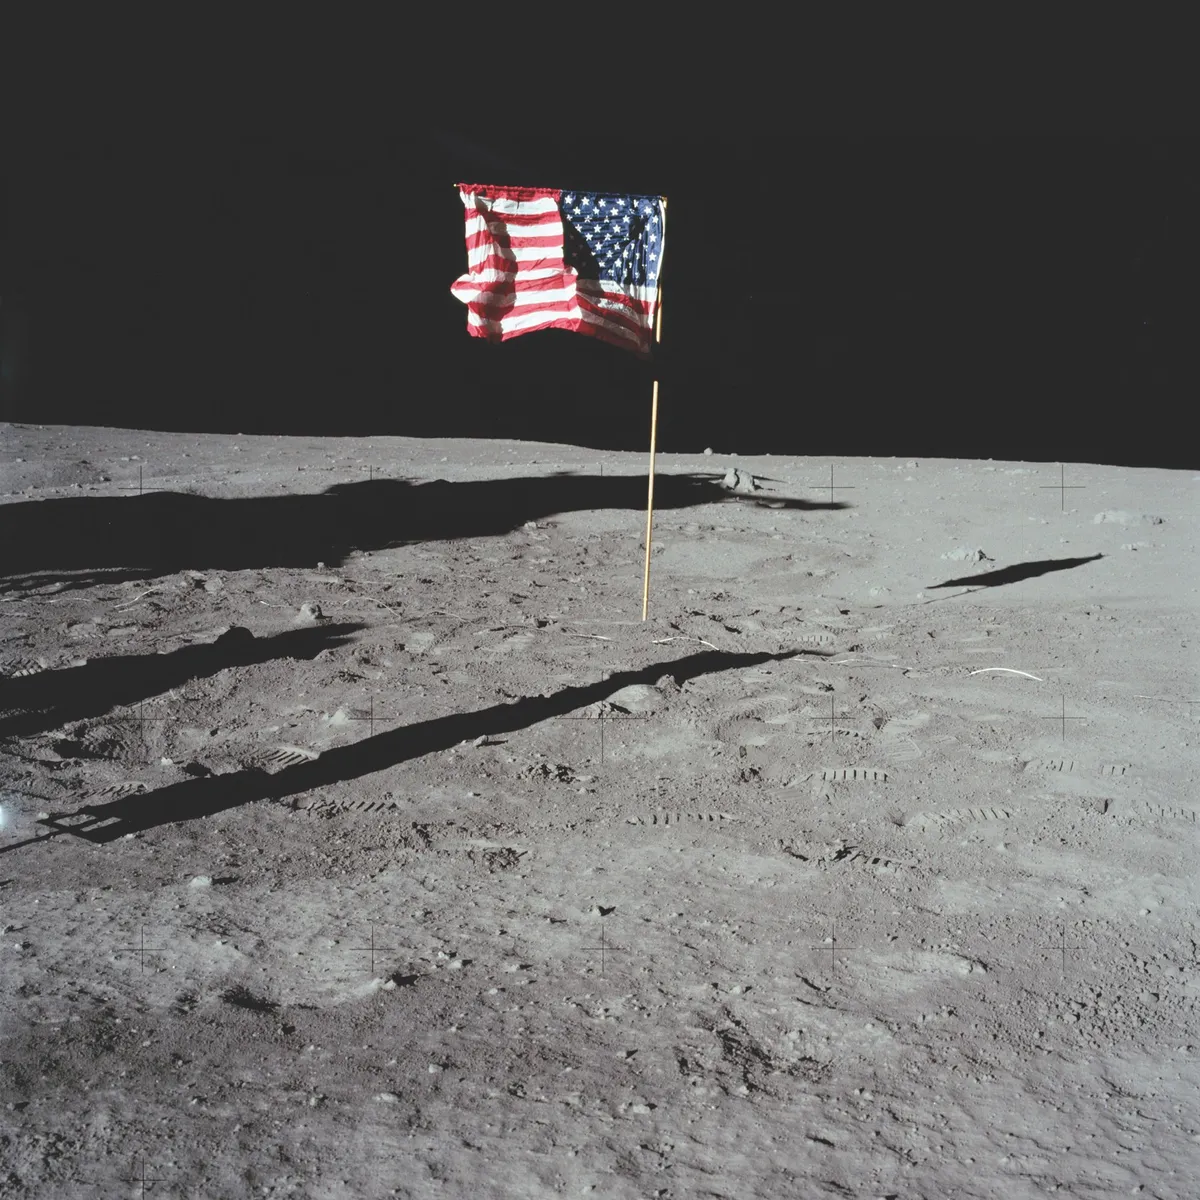 Around 90 minutes into his moonwalk, Buzz Aldrin took this photo of the American flag planted in the lunar landscape © NASA/JPL